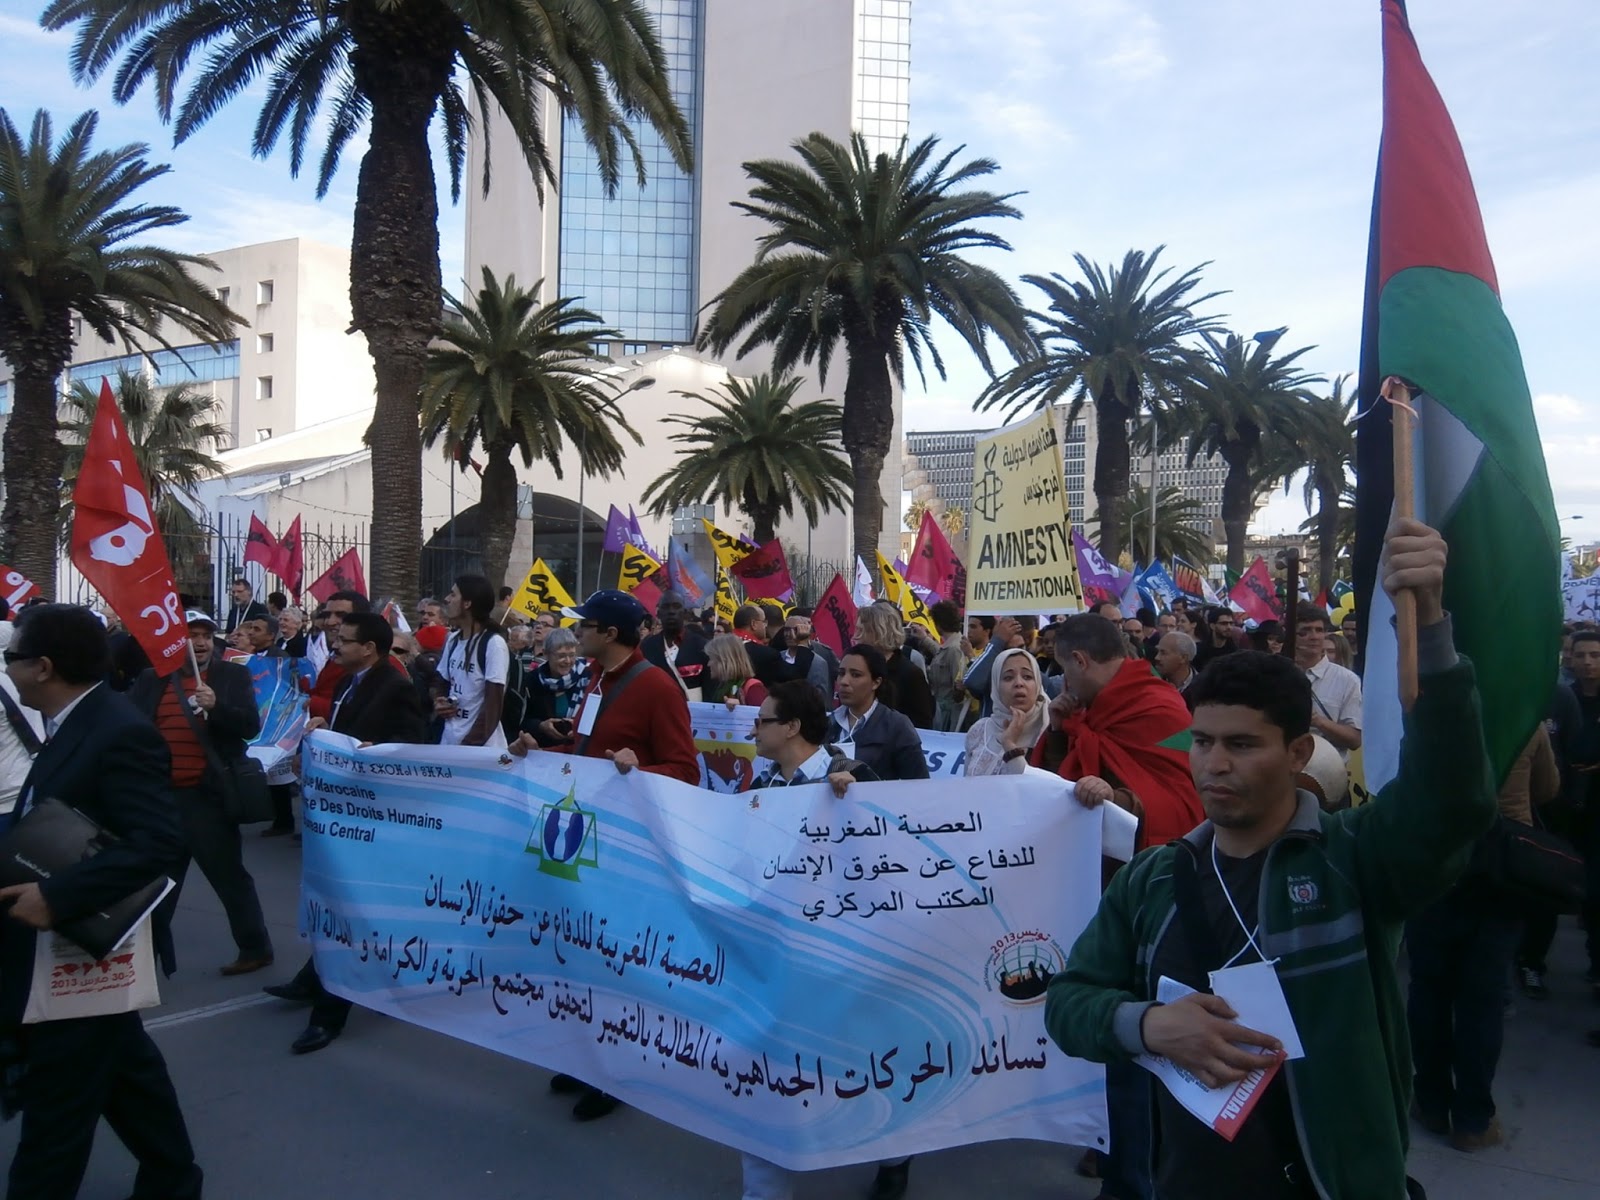 Example on the demonstrations diversity: Moroccan human rights organisation in front